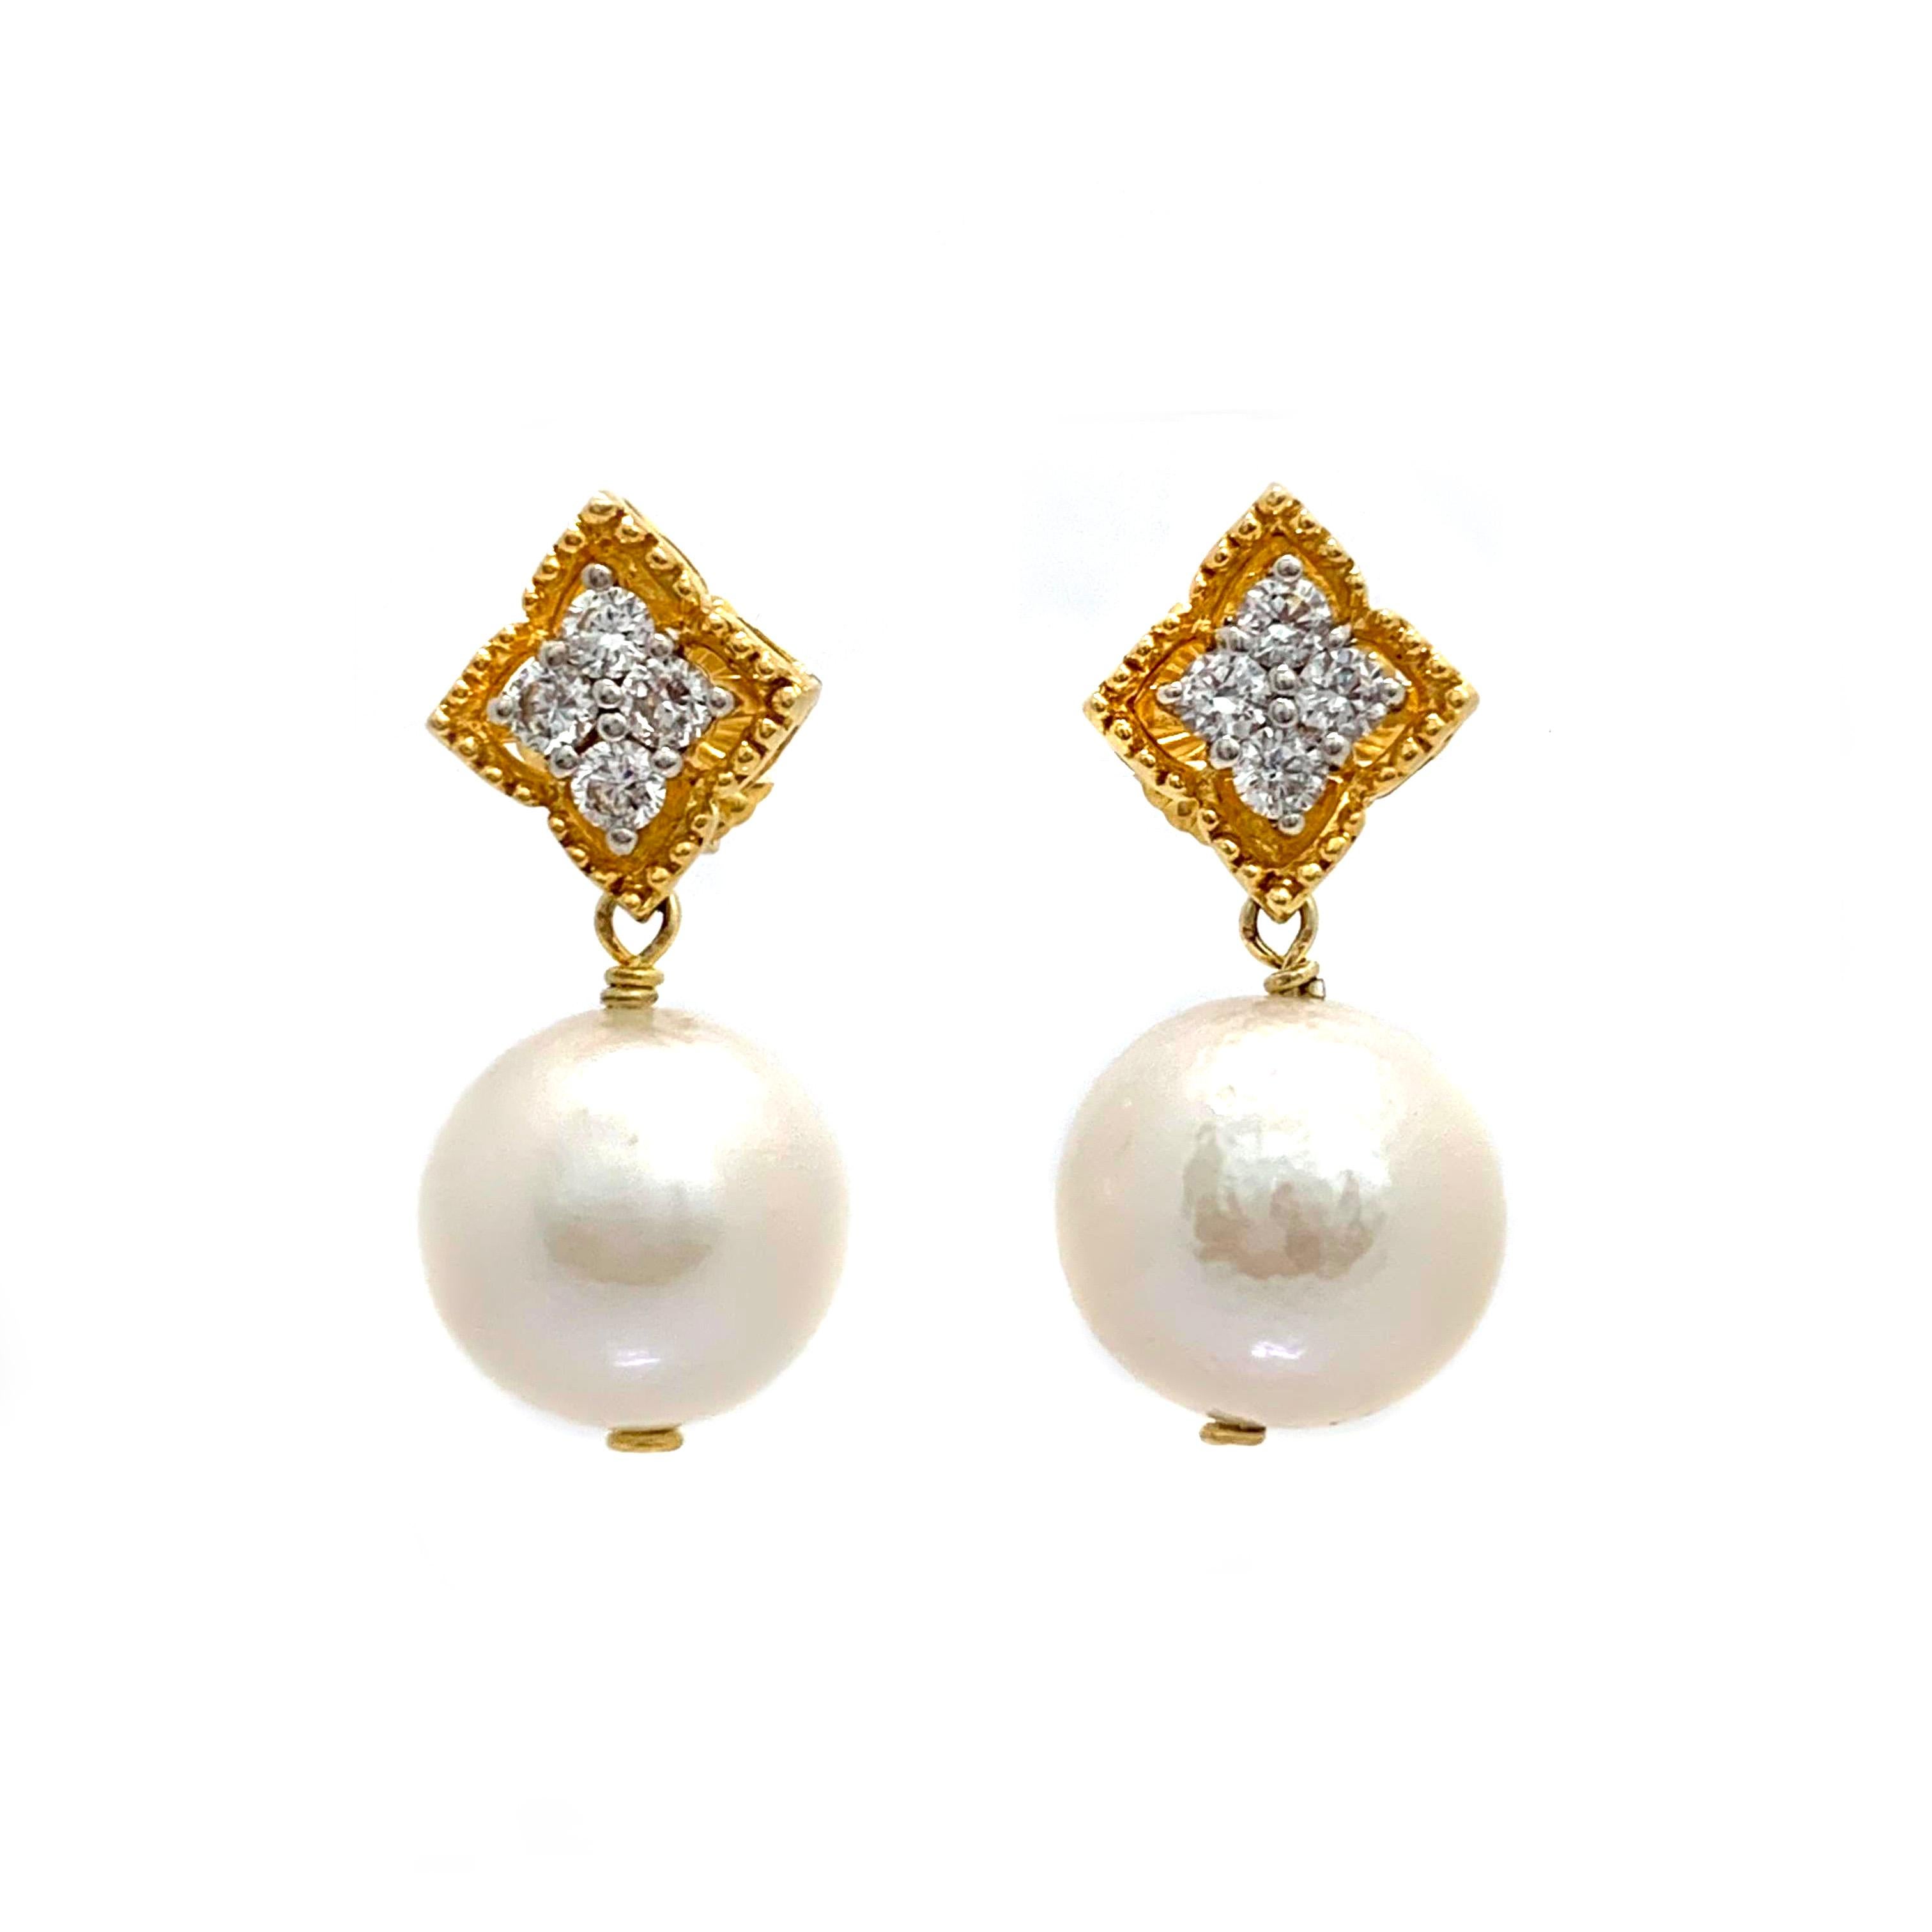 Elegant 15mm Cultured Pearl Drop Earrings

These elegant pair of earrings feature a pair of lustrous 15mm cultured Edison pearls and adorned with round simulated diamonds, handset in 18k yellow gold vermeil over sterling silver. The pearls measured